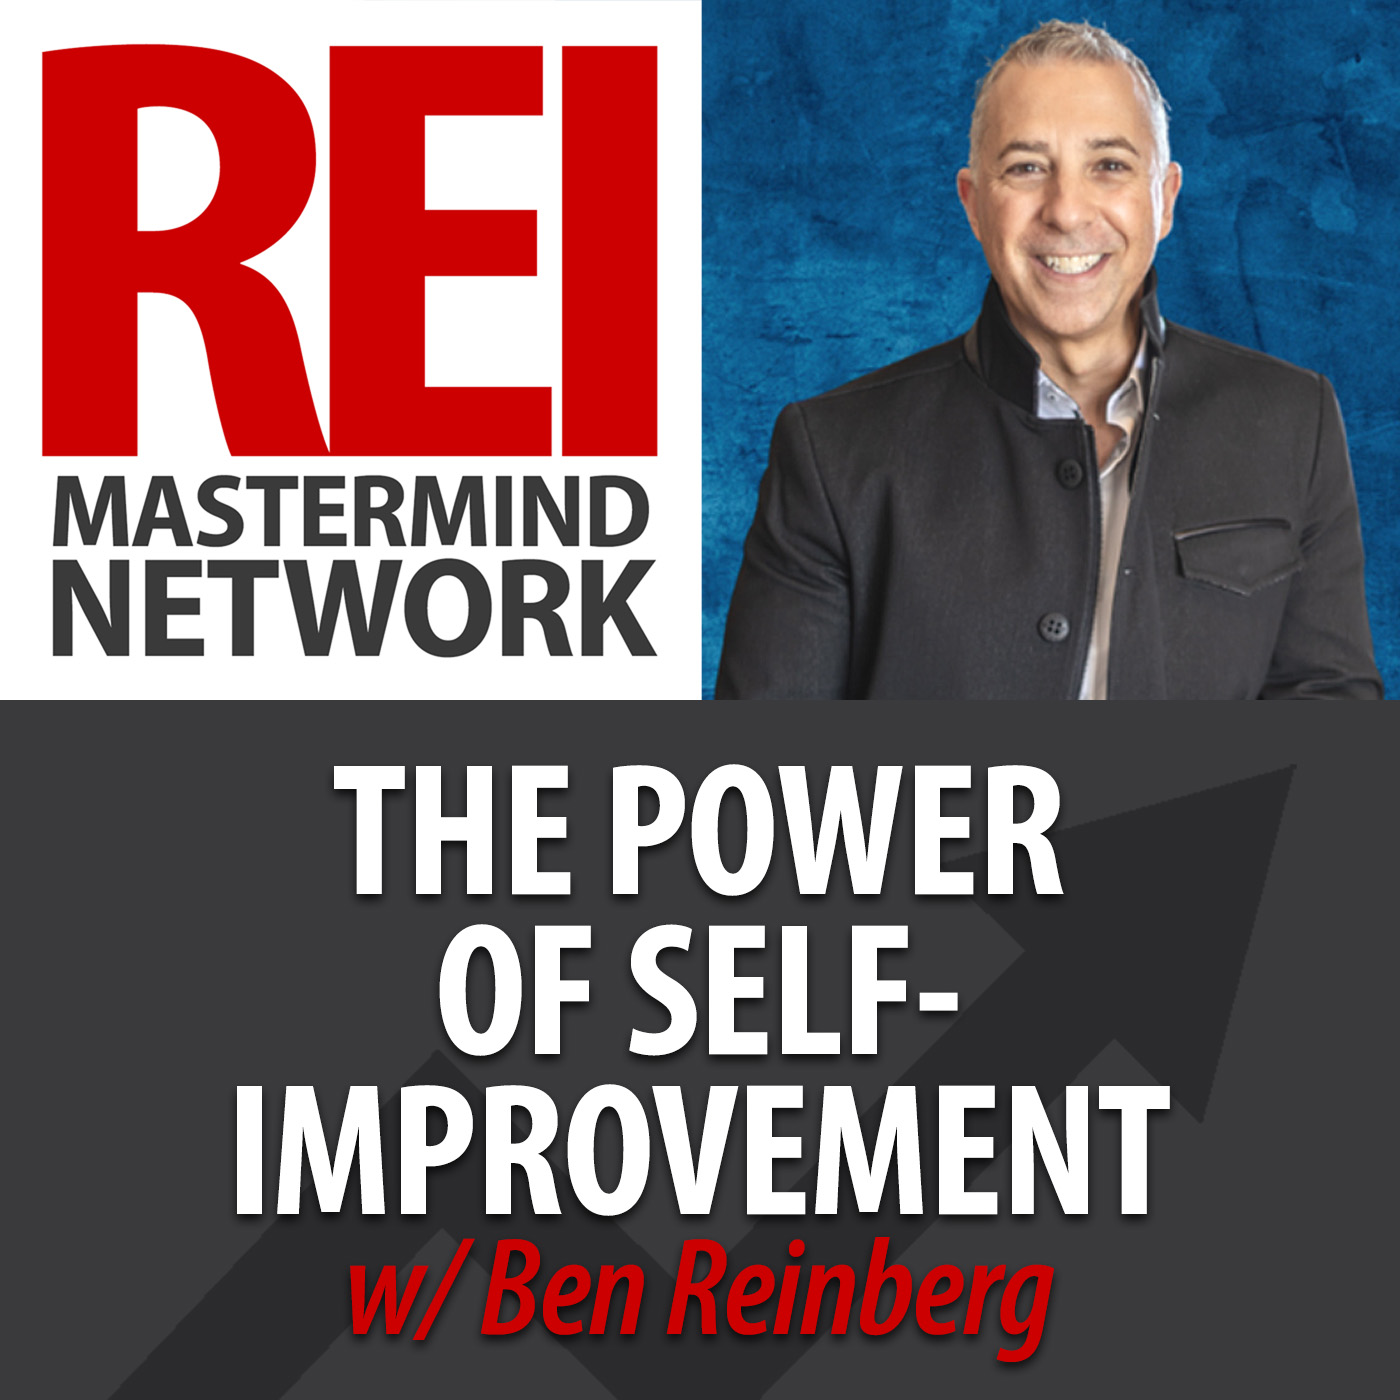 The Power of Self-Improvement with Ben Reinberg